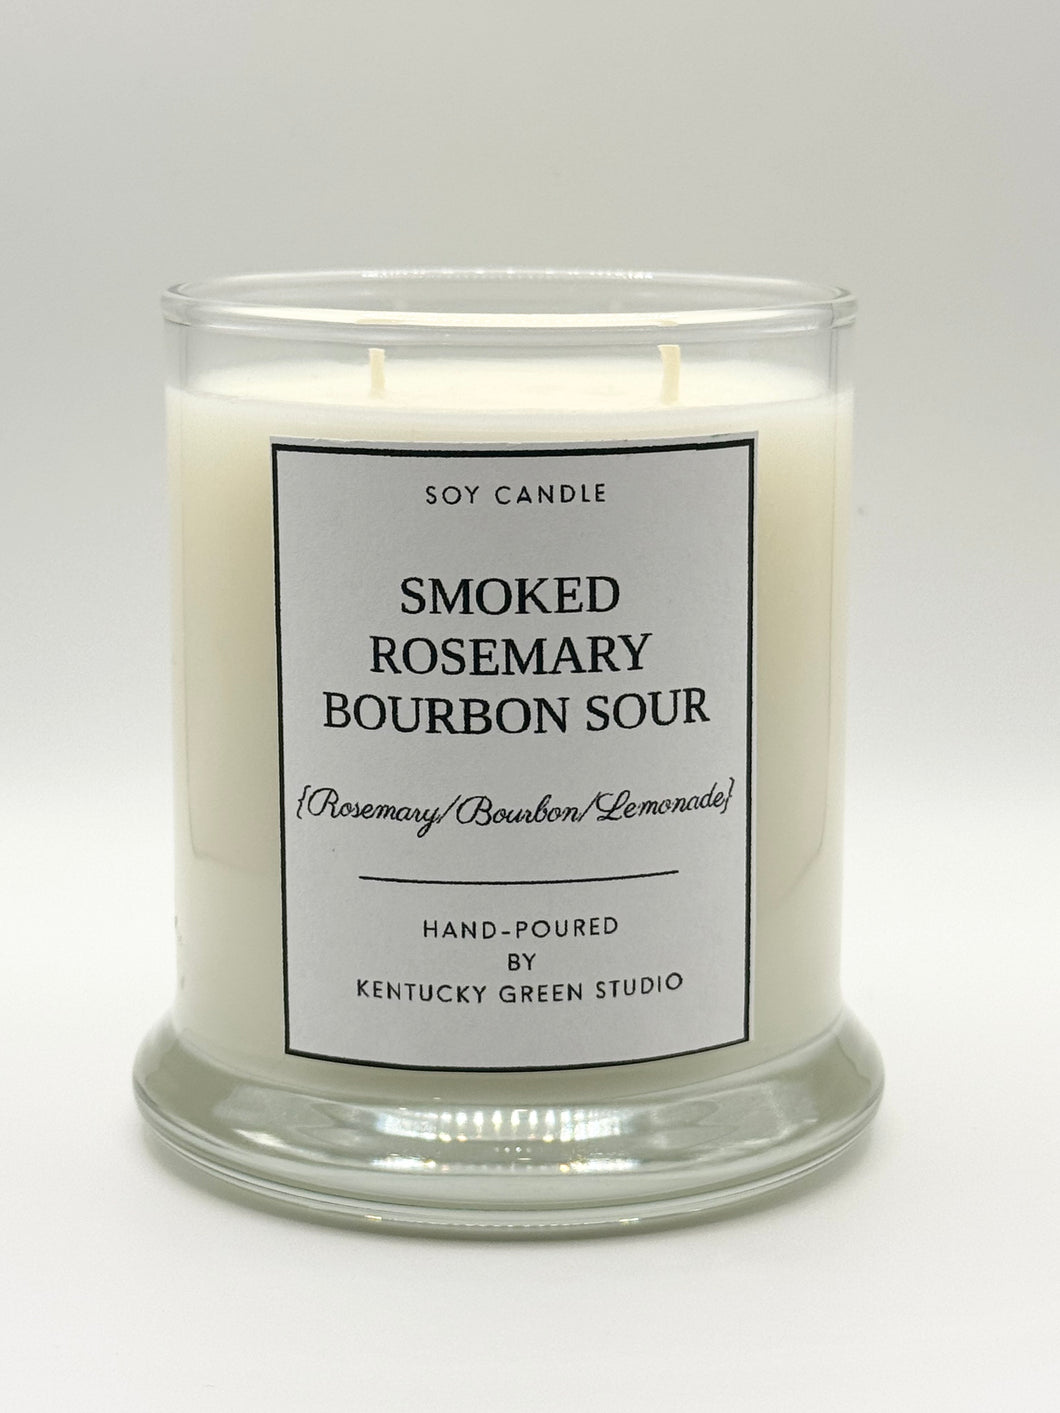 Smoked Rosemary Bourbon Sour Soy Candle